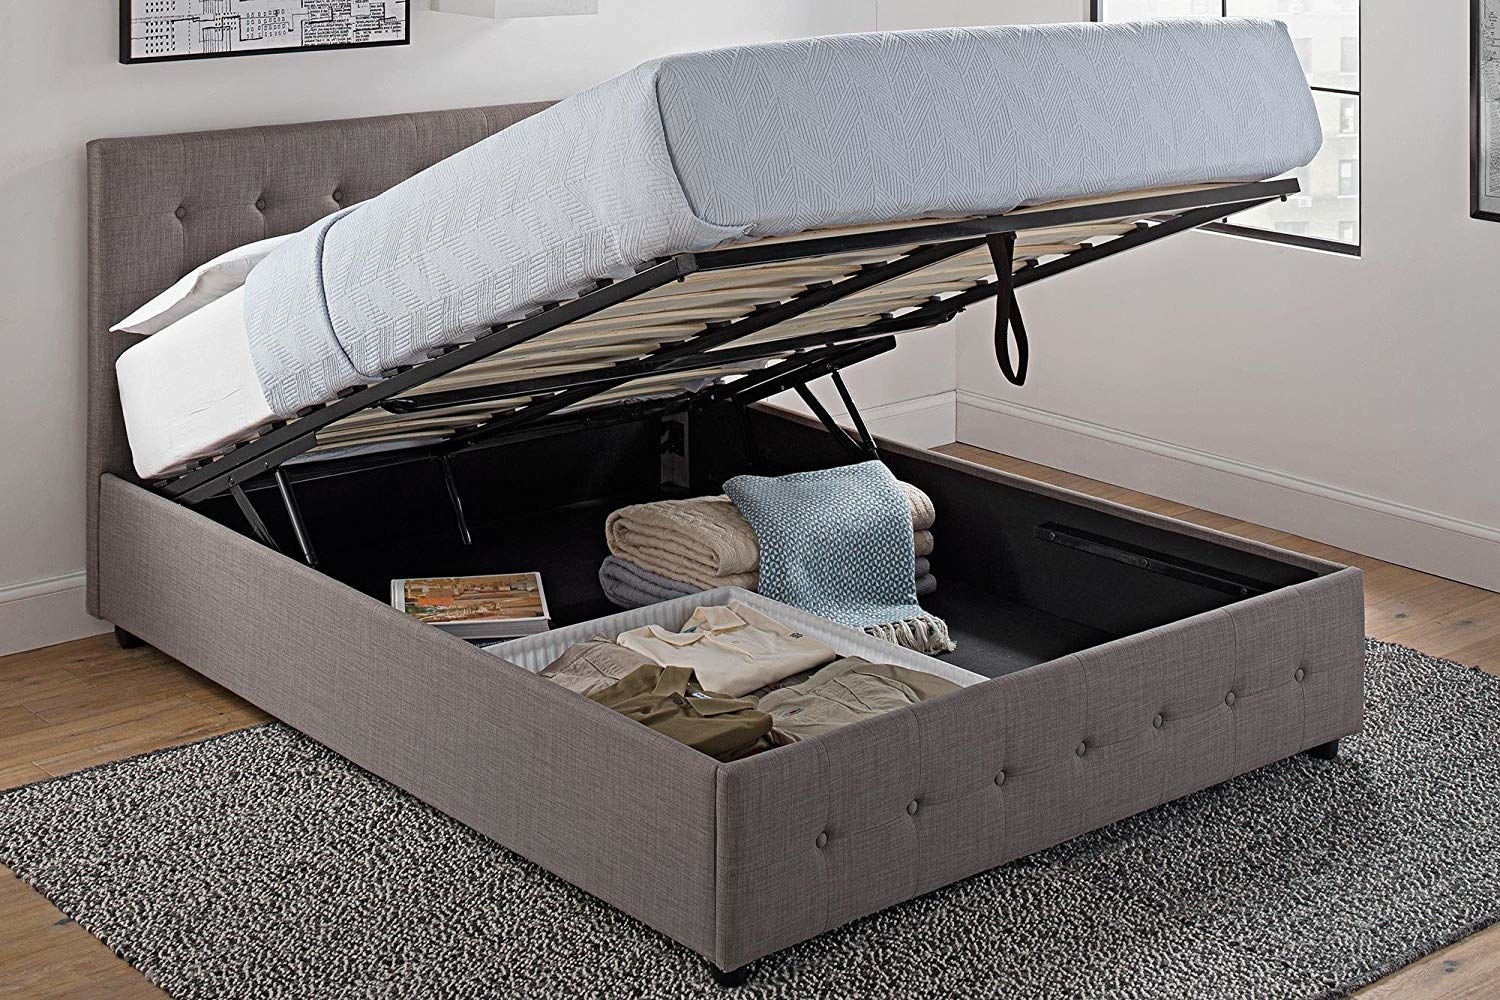 the grey linen bed open showing storage underneath